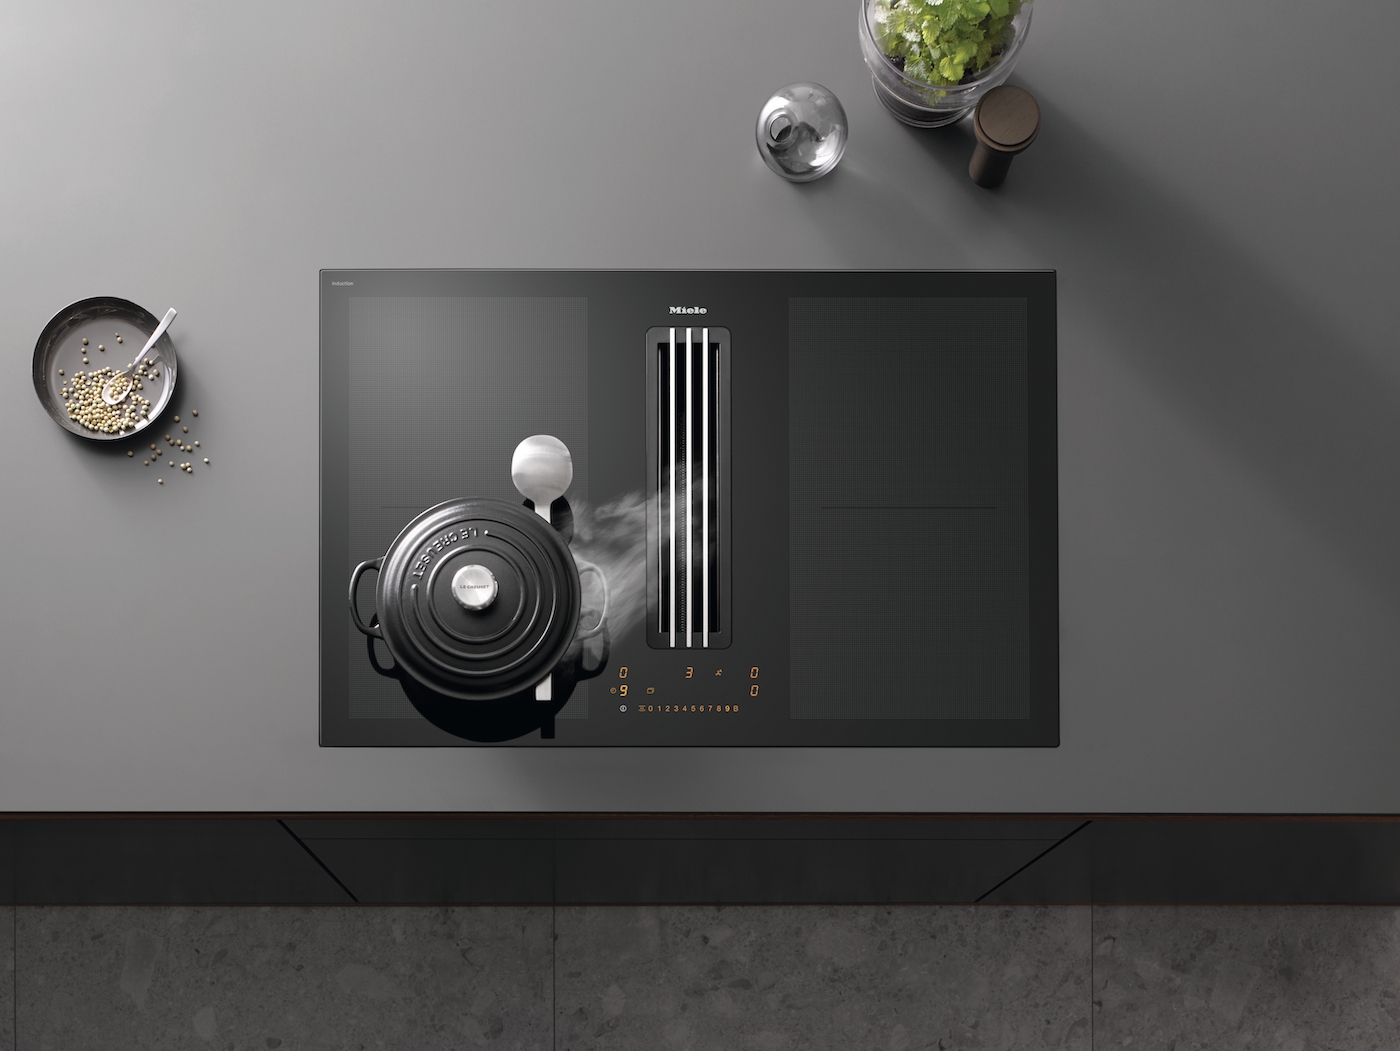 KMDA 7476 FL Induction hob with integrated vapour extraction  product photo Laydowns Detail View ZOOM